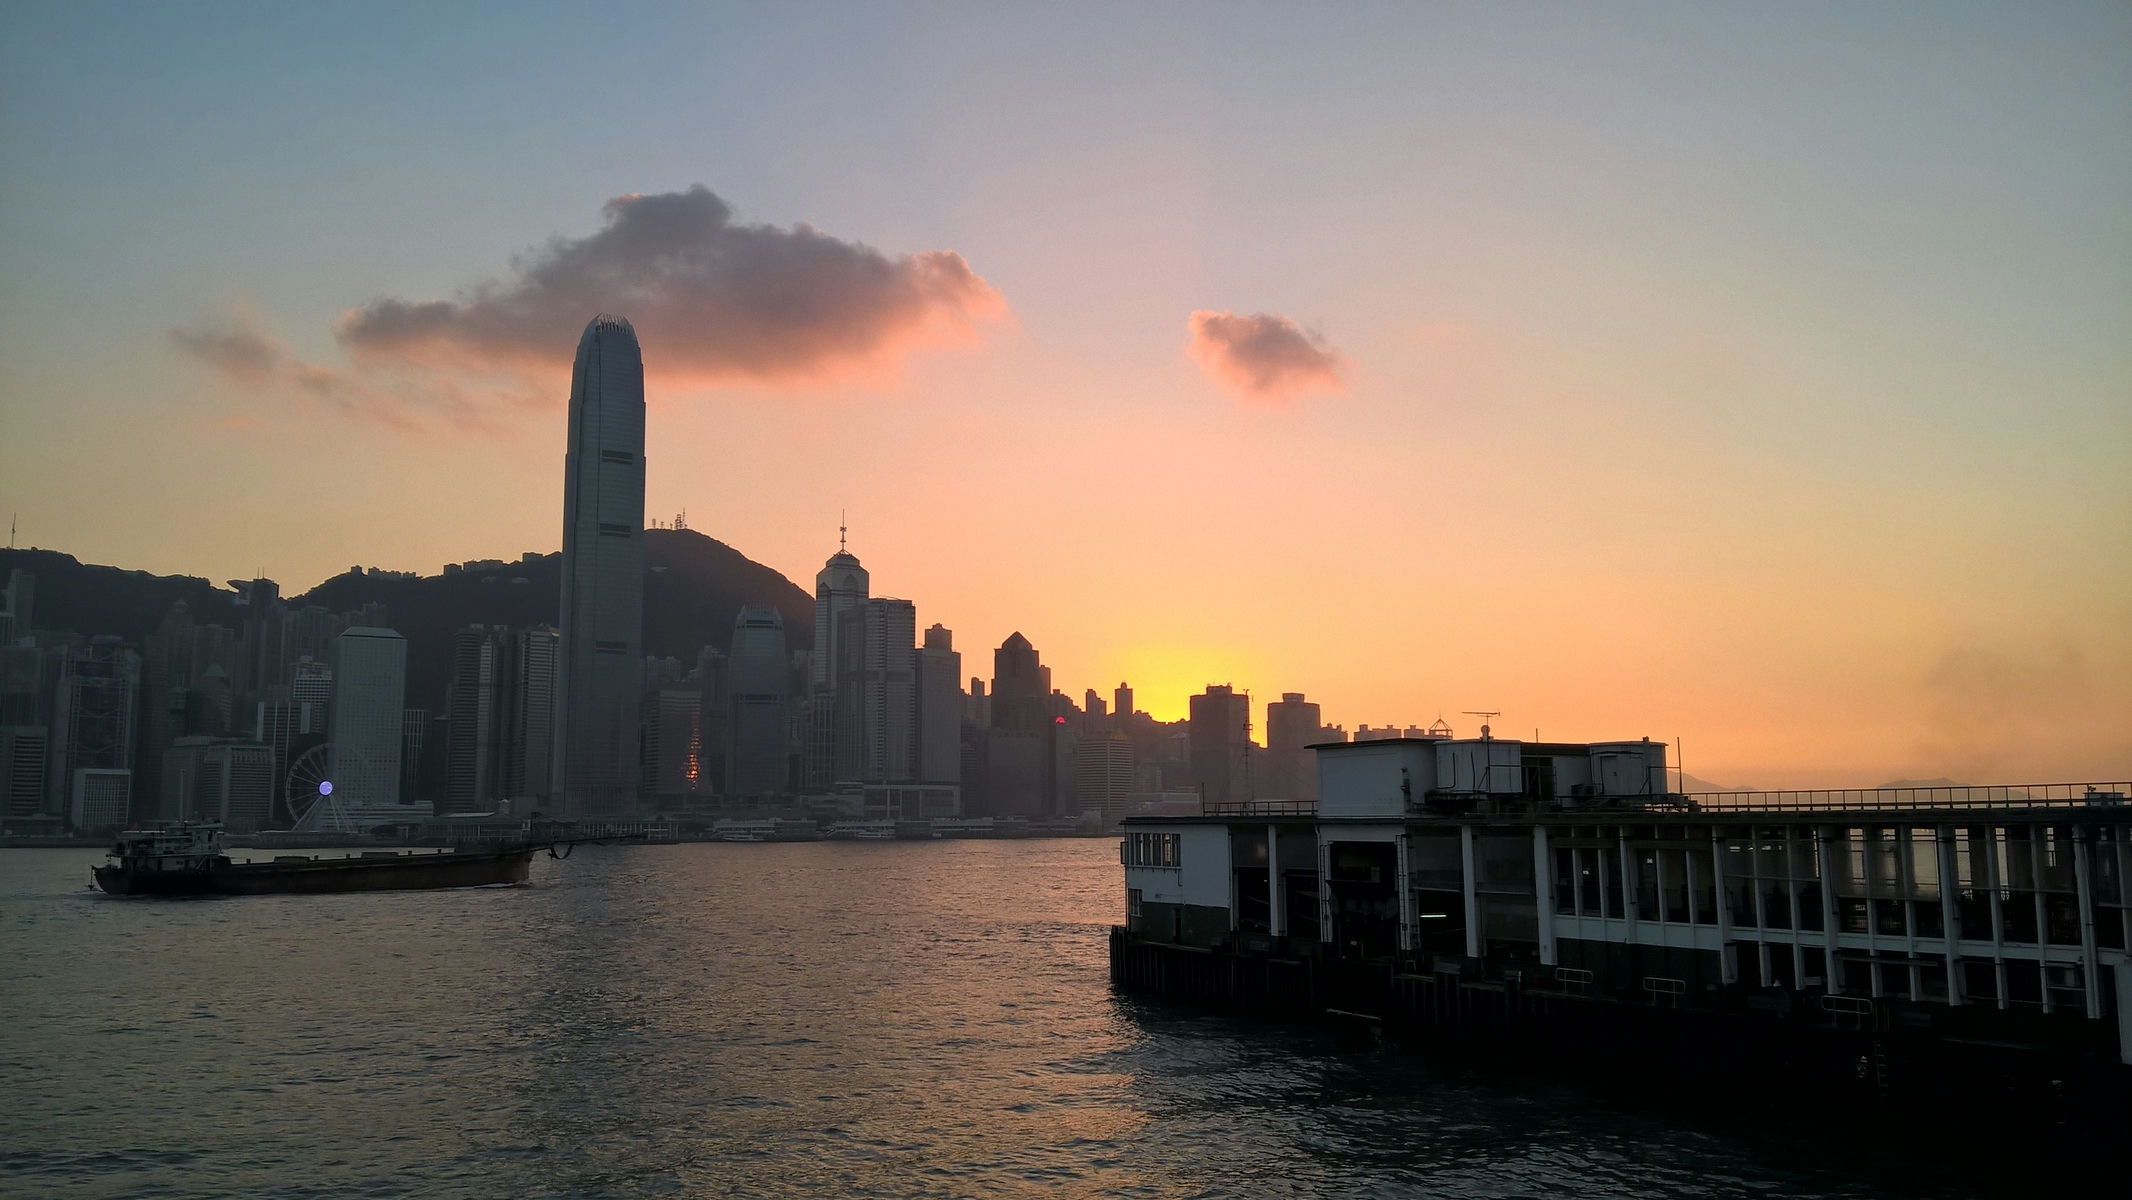 Star Ferry Pier is close to the hotels in Tsim Sha Tsui